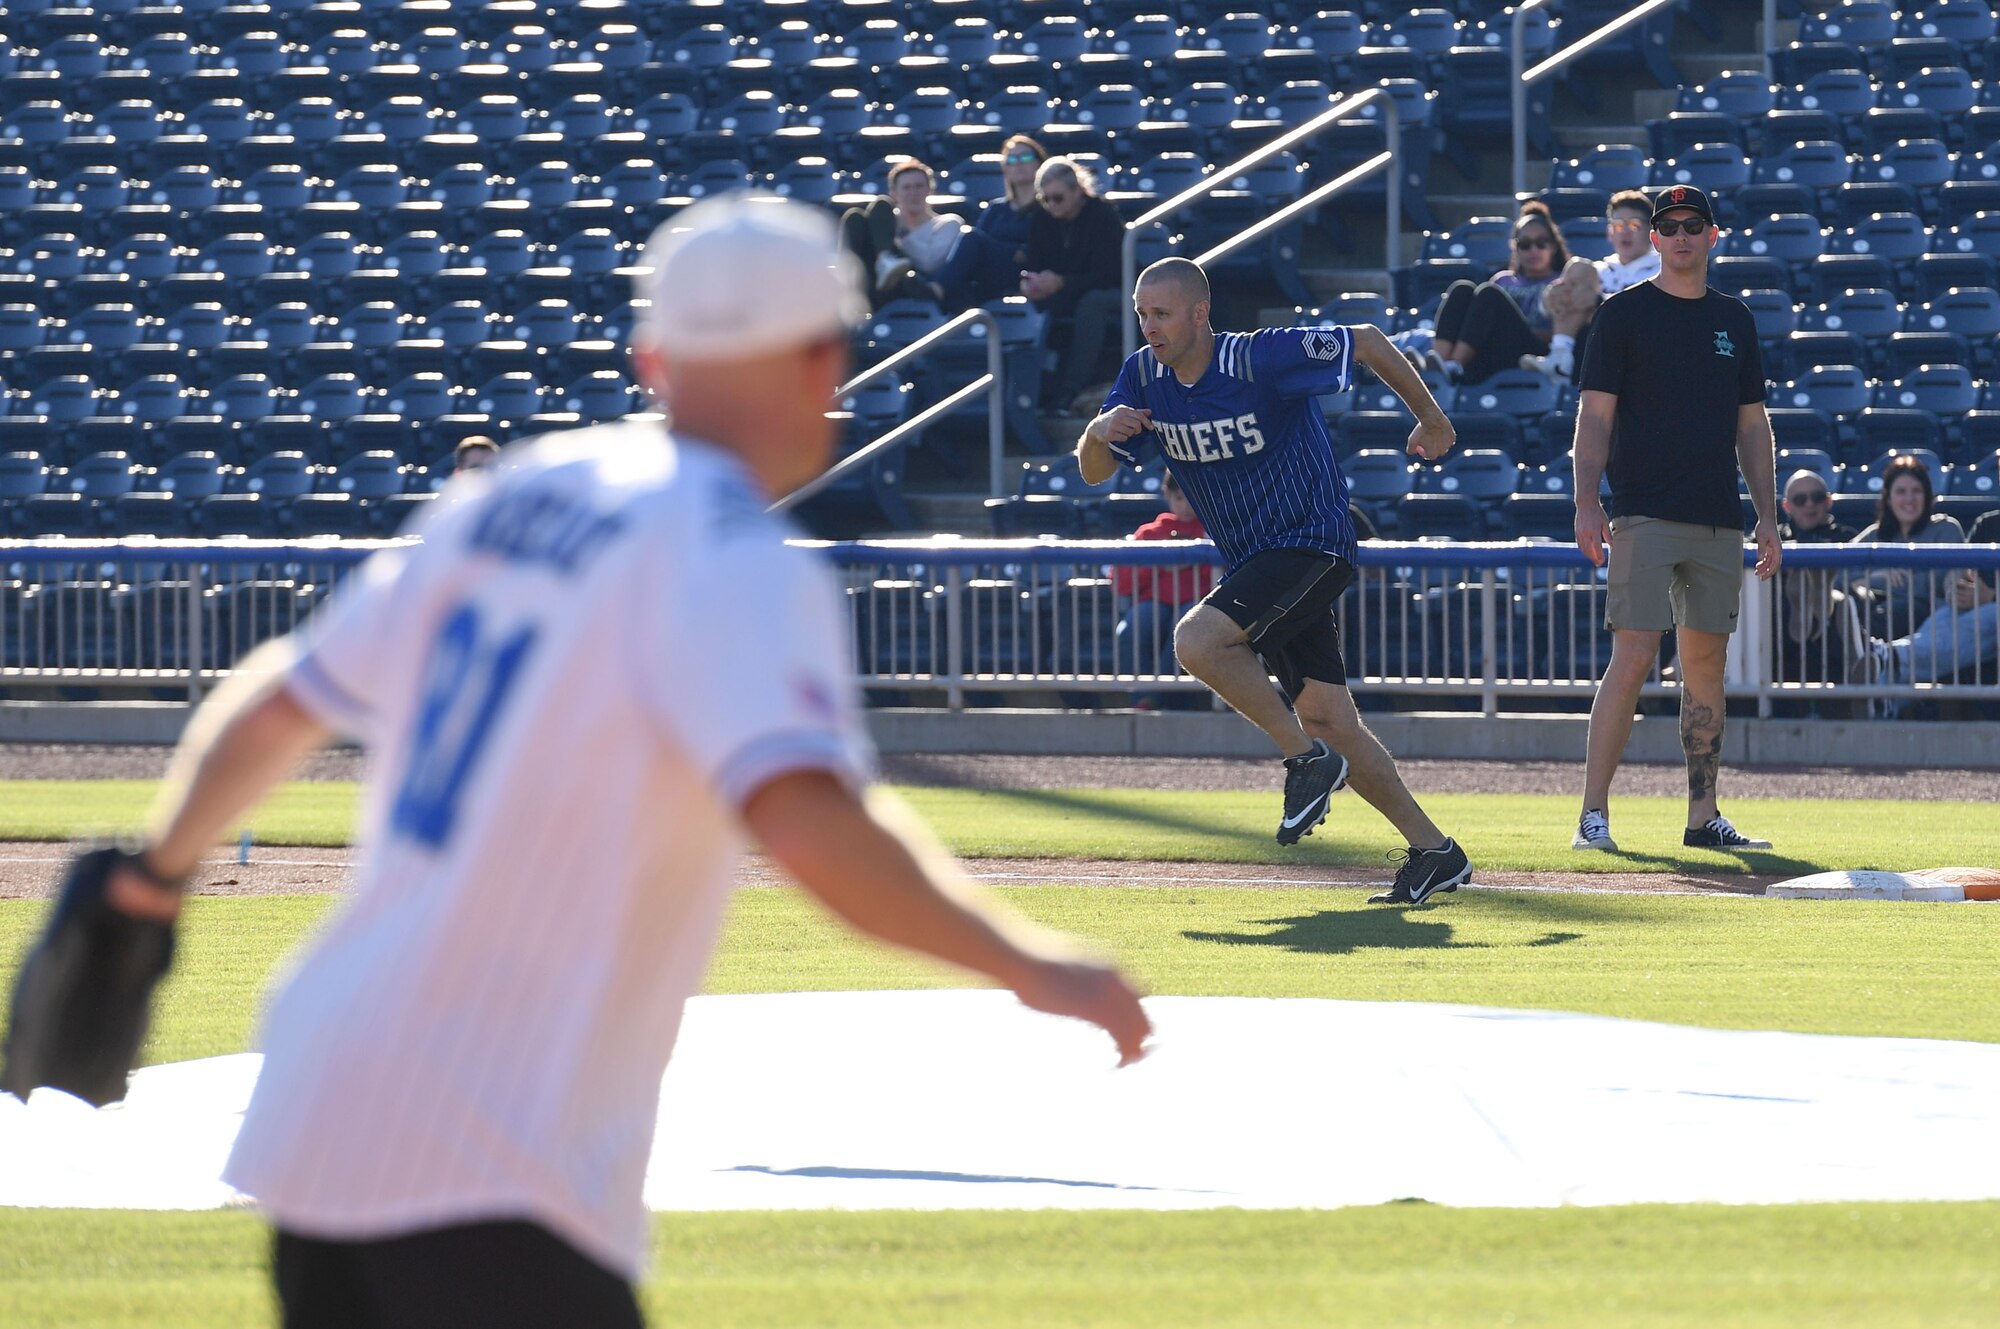 U.S. Air Force Chief Master Sgt. Lance Power, 81st Mission Support Group superintendent, runs towards first base during the Chiefs vs. Eagles softball game at MGM Park in Biloxi, Mississippi, December 3, 2021. The chief master sergeants and colonels softball match, titled Chiefs vs. Eagles, was preceded by a homerun derby and a military working dog demonstration. (U.S. Air Force photo by Kemberly Groue)